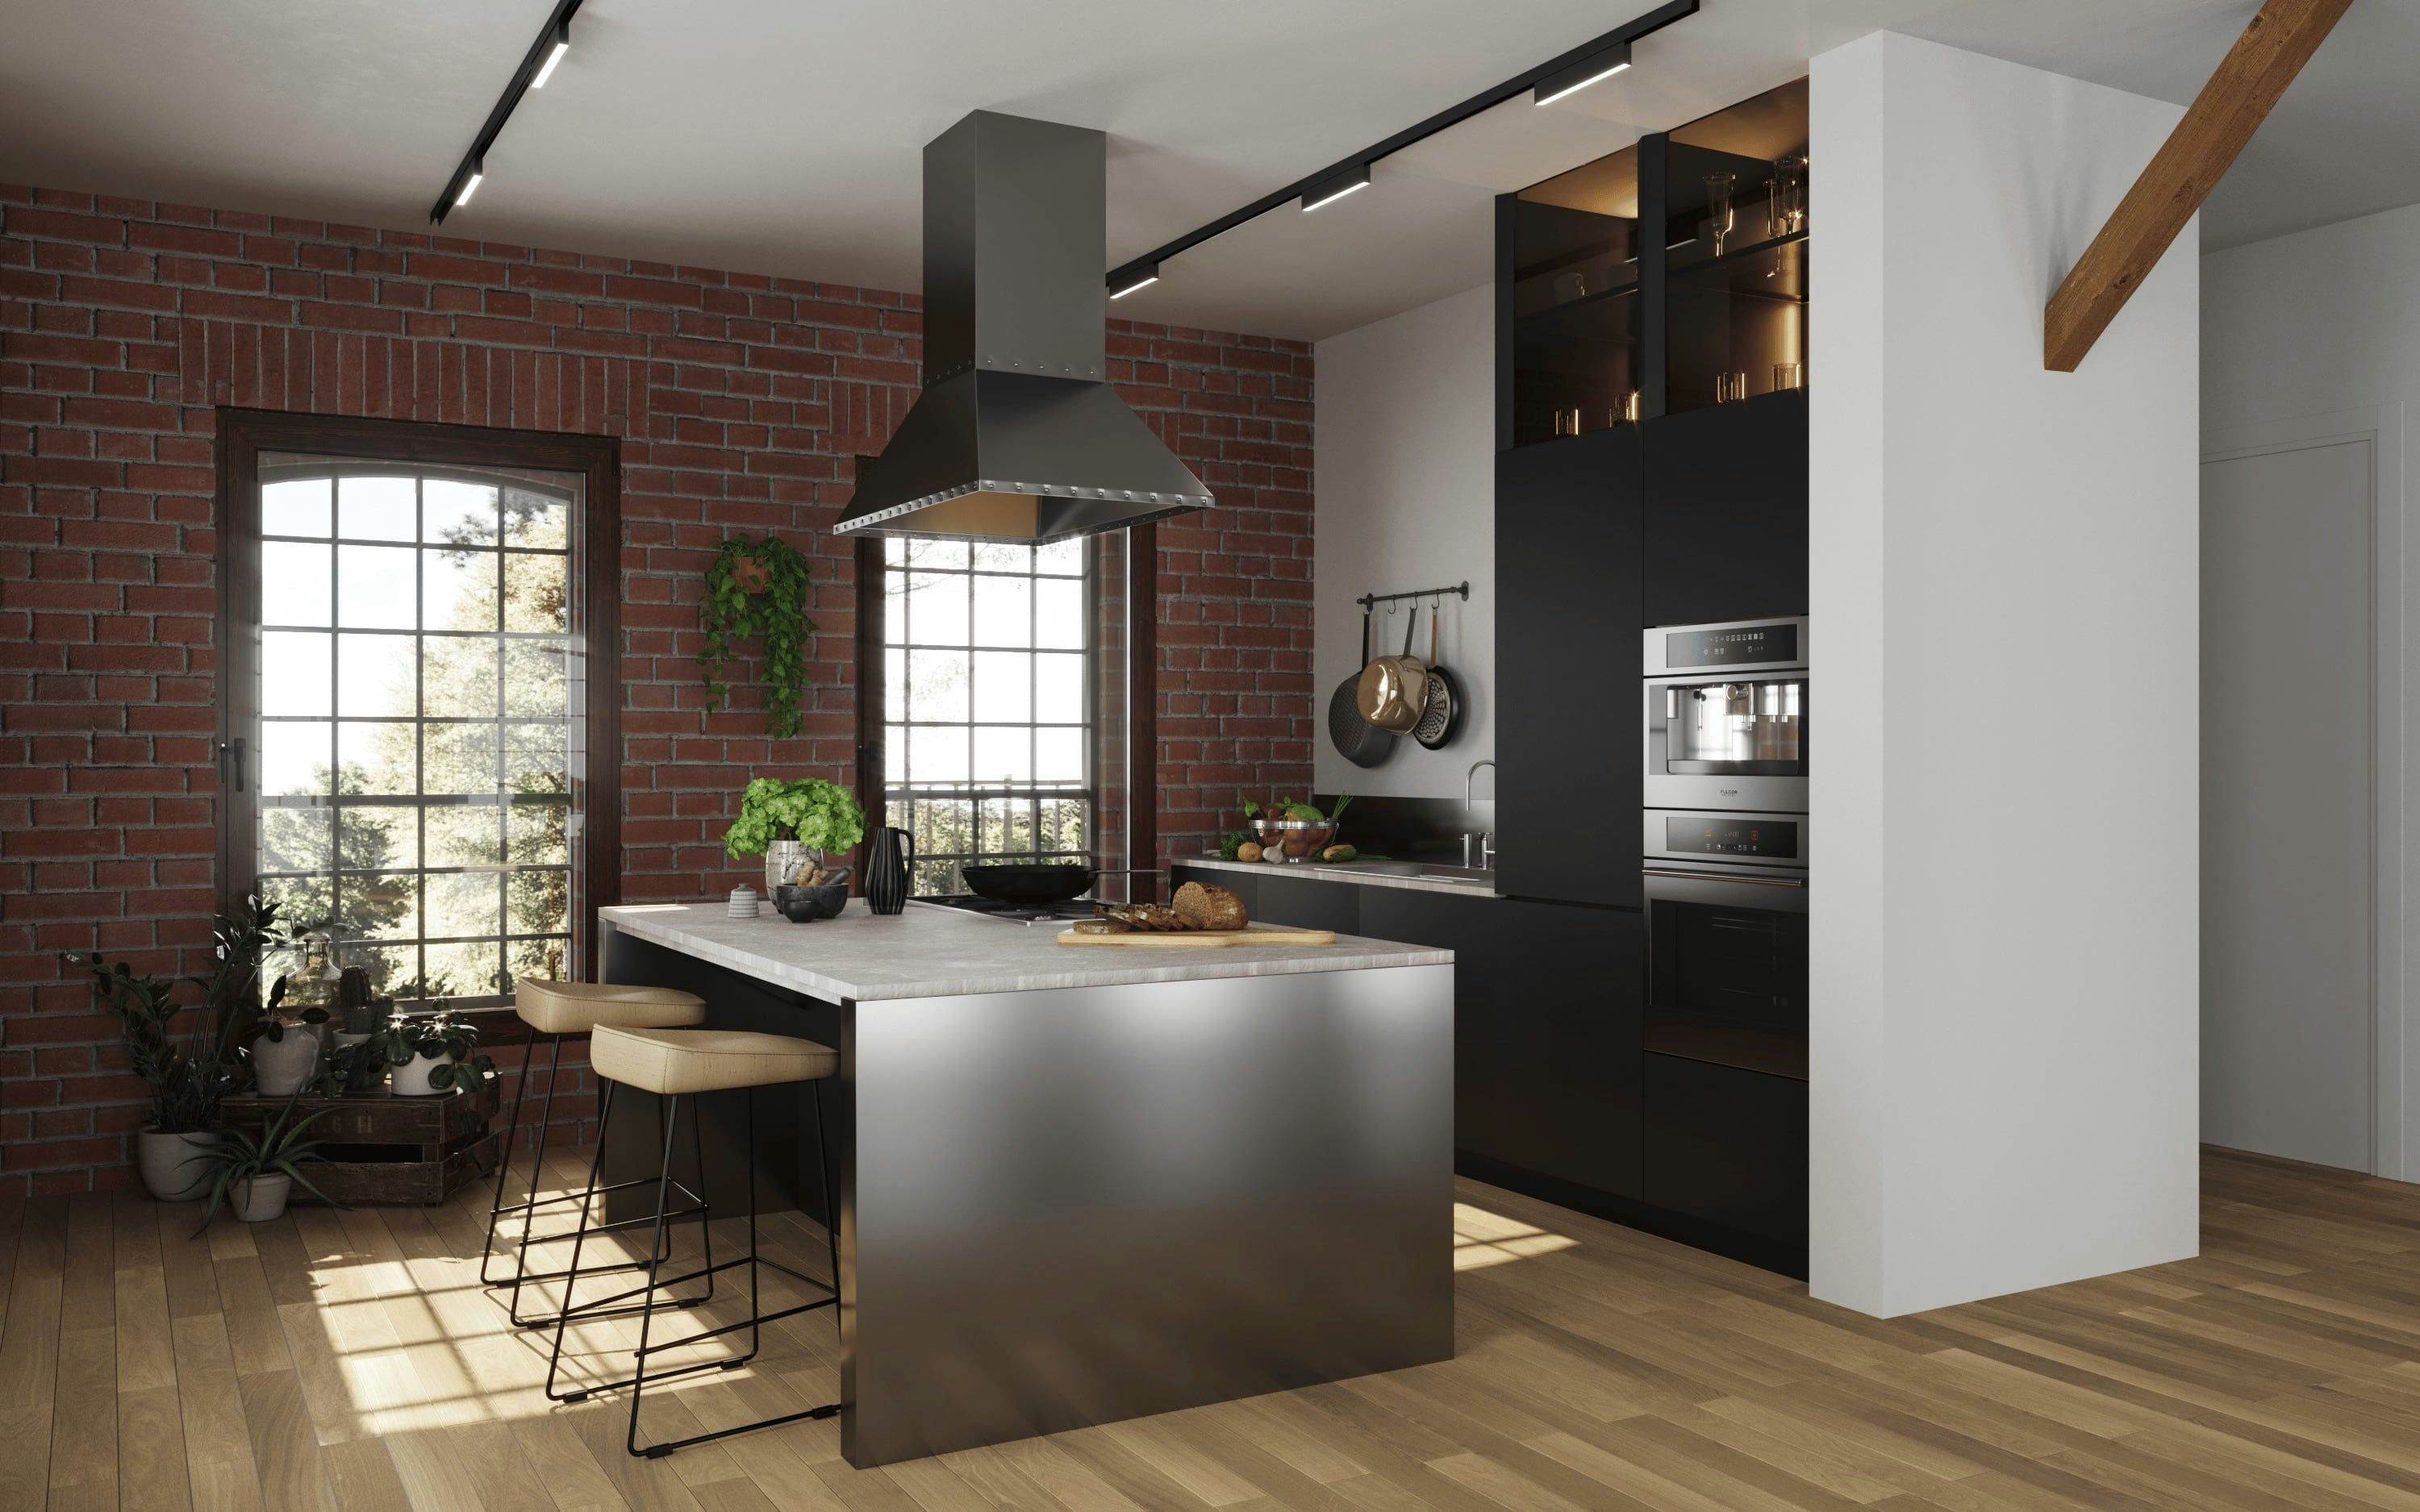 3D Interior Visualization of kitchen with cooking island in renovated historical property in loft style, Germany